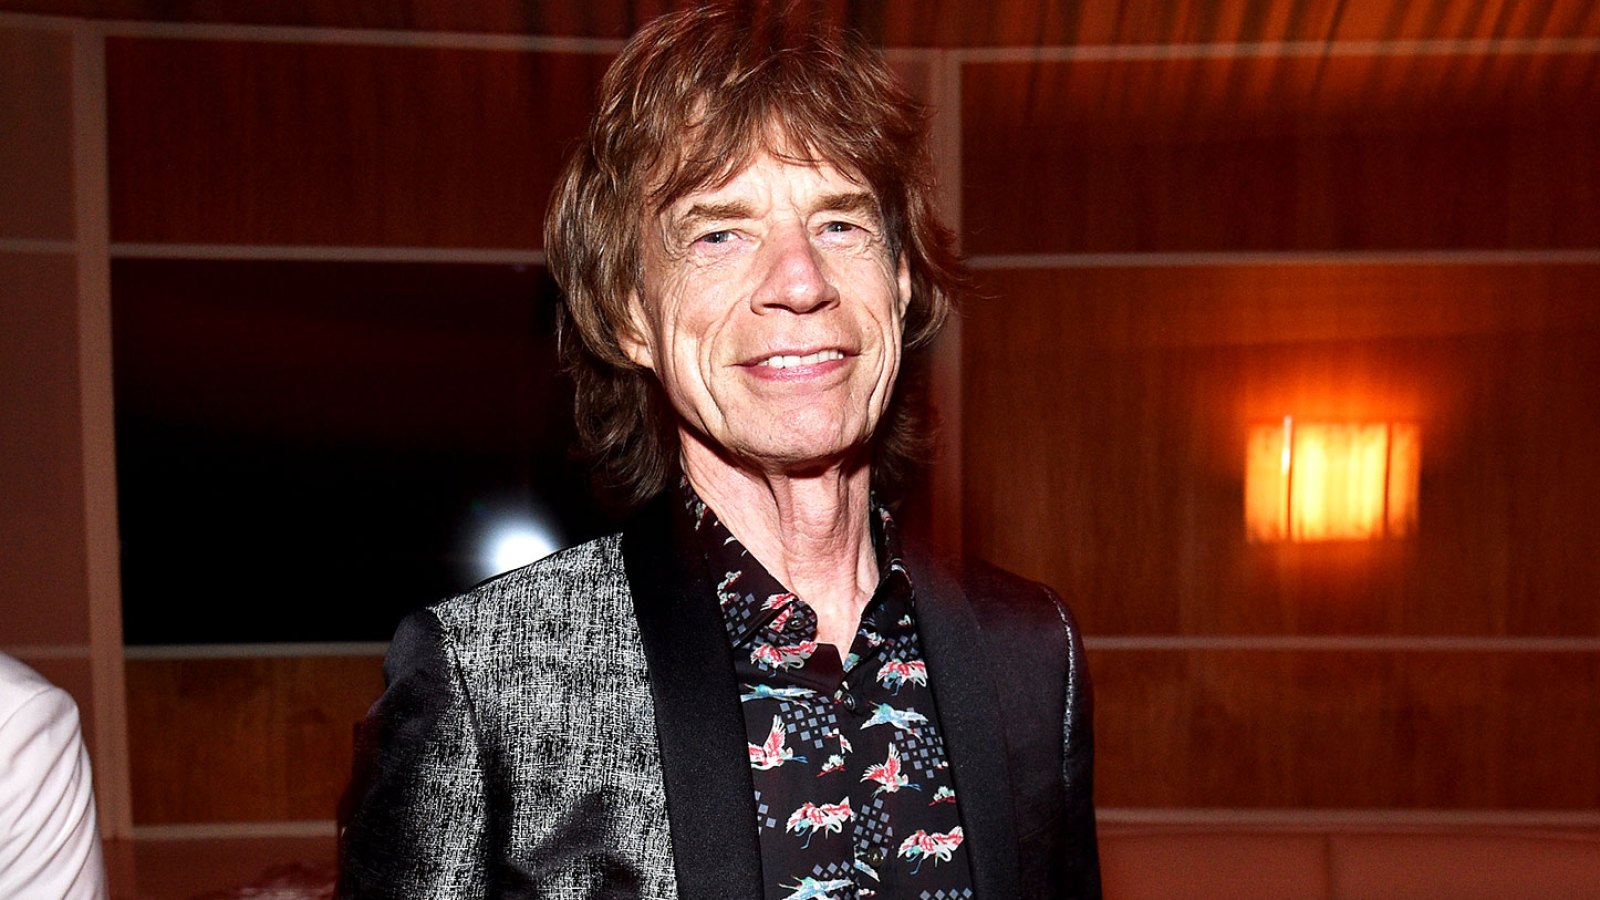 Mick Jagger Thanks Fans for Support After Heart Surgery: 'I'm Feeling Much Better Now'